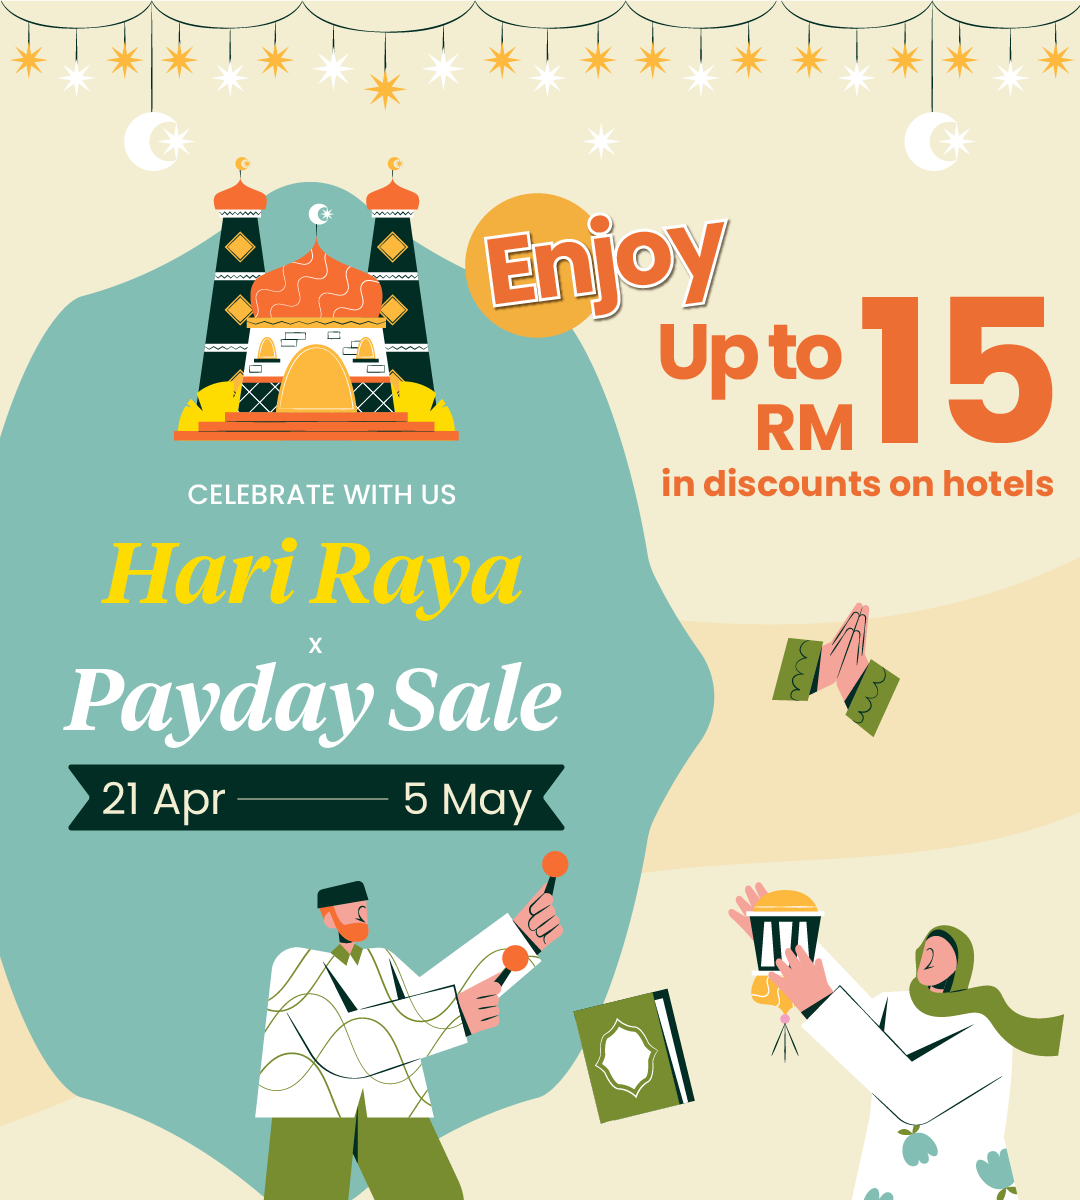 Happy Hari Raya x Payday Sale! Let’s celebrate with discount up to RM15